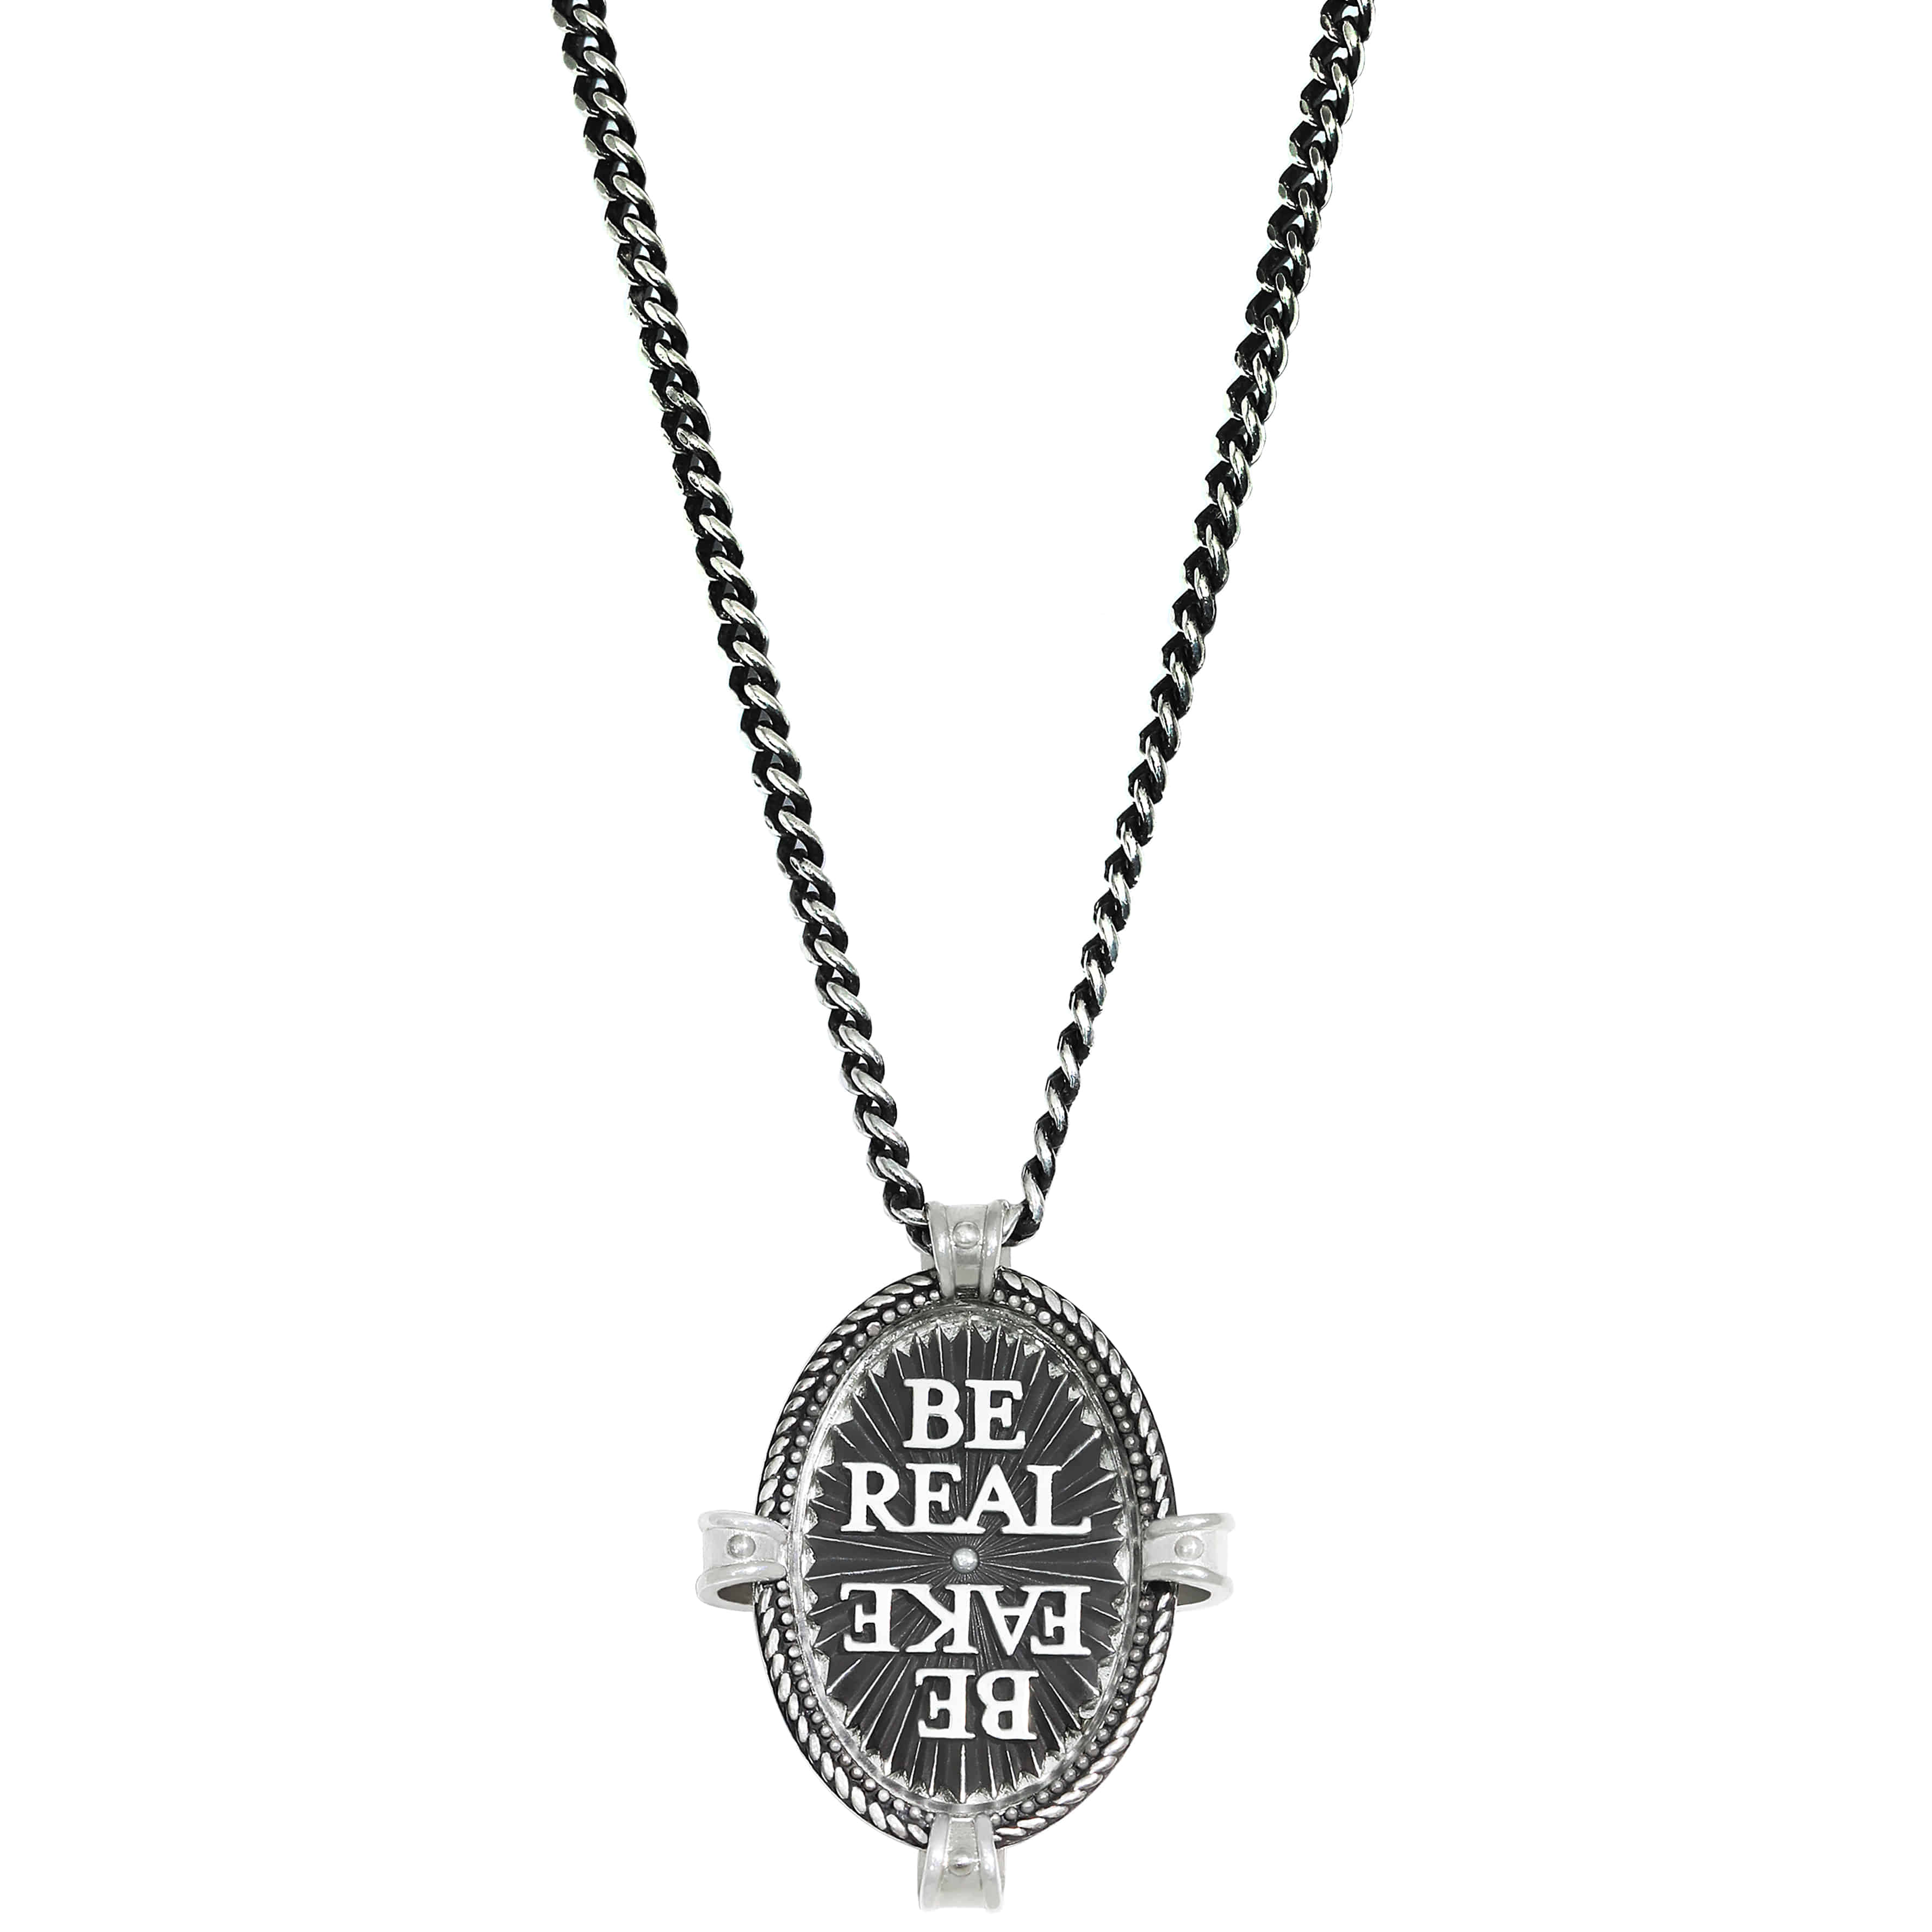 &#039;BE REAL BE FAKE&#039; Clear 3way Necklace